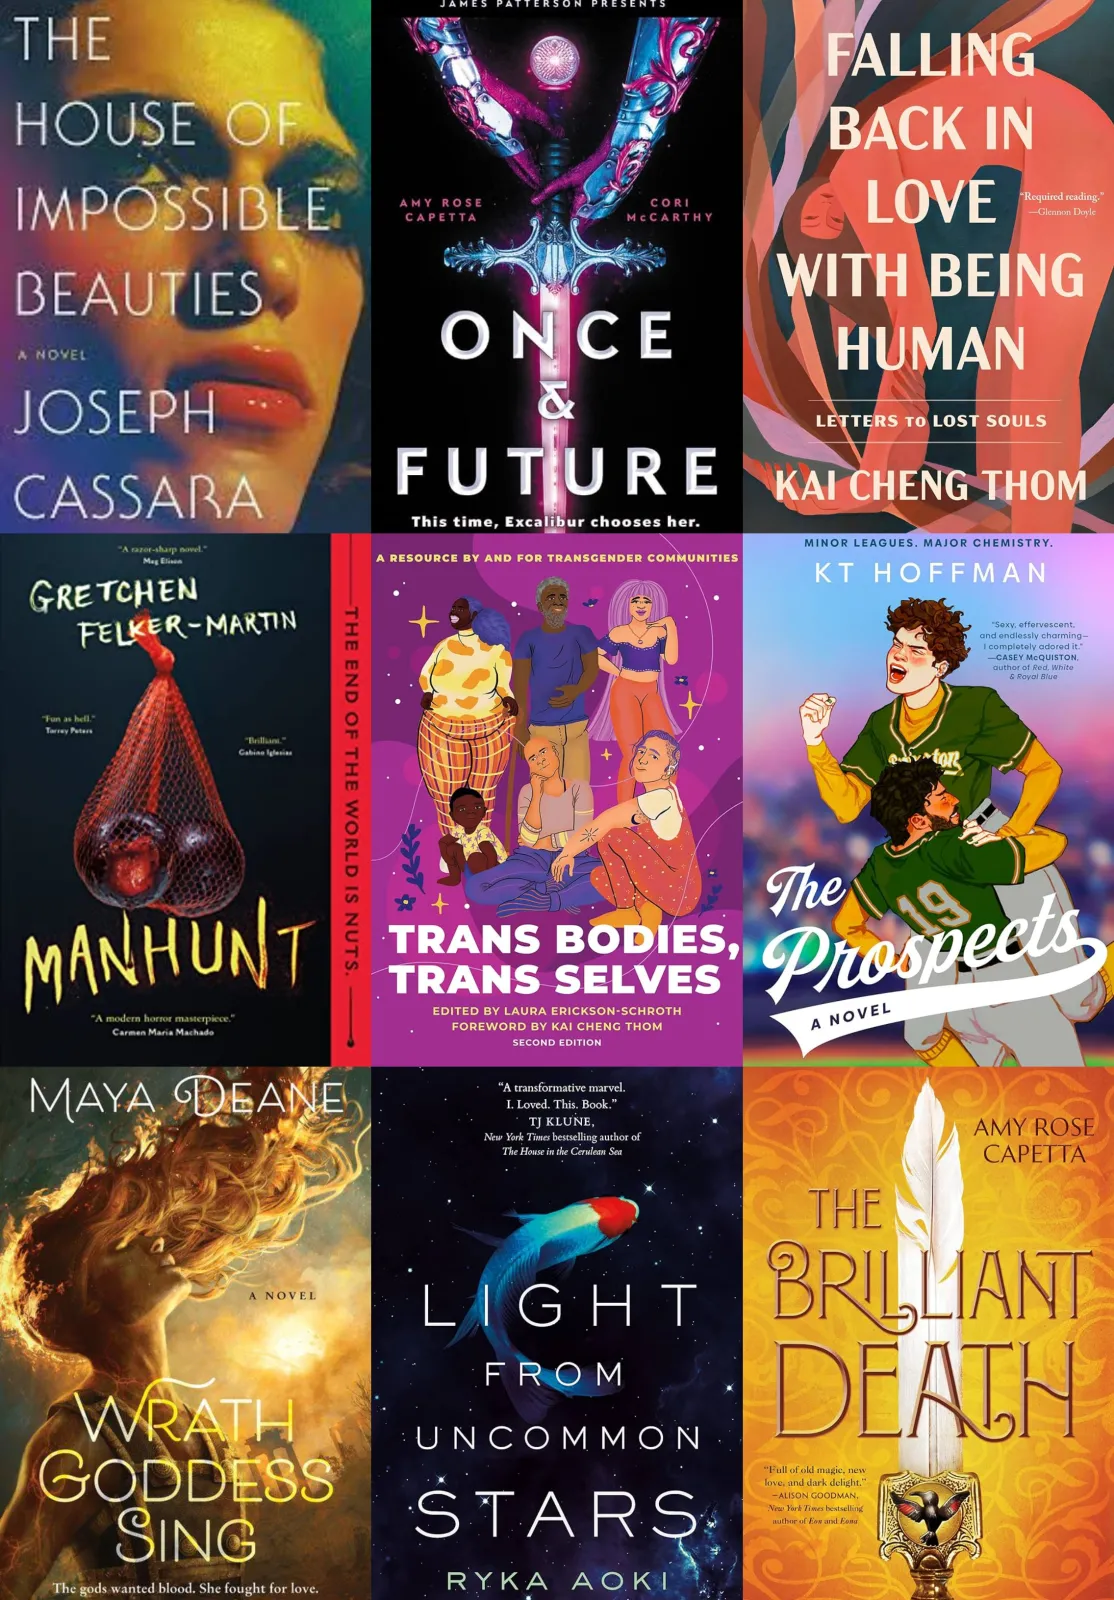 Image shows a collage of nine bookcovers: The House of Impossible Beauties by Joseph Cassara; Once & Future by A.R. Capetta; Falling Back in Love with Being Human by Kai Cheng Thom; Manhunt by Gretchen Felker-Martin; Trans Bodies, Trans Selves edited by Laura Erickson-Schroth; The Prospect by K.T. Hoffman; Wrath Goddess Sing by Maya Deane; Light from Uncommon Stars by Ryka Aoki, and The Brilliant Death by A.R. Capetta